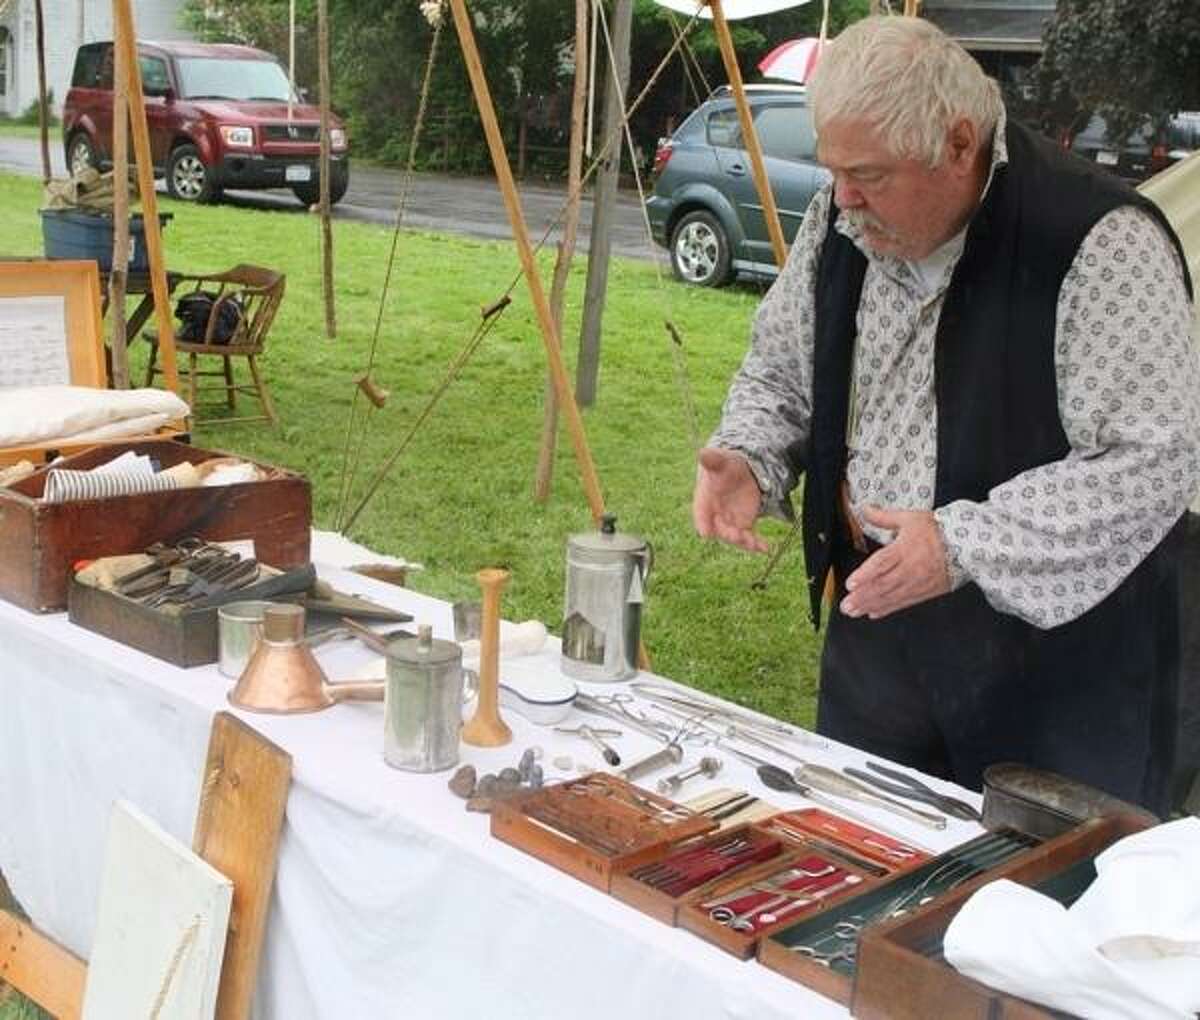 JOHN HAEGER @ONEIDAPHOTO ON TWITTER/ONEIDA DAILY Bill Mayers explains the tools and about the duties of a Civil War Surgeon on Friday, June 7, 2013 in Peterboro.